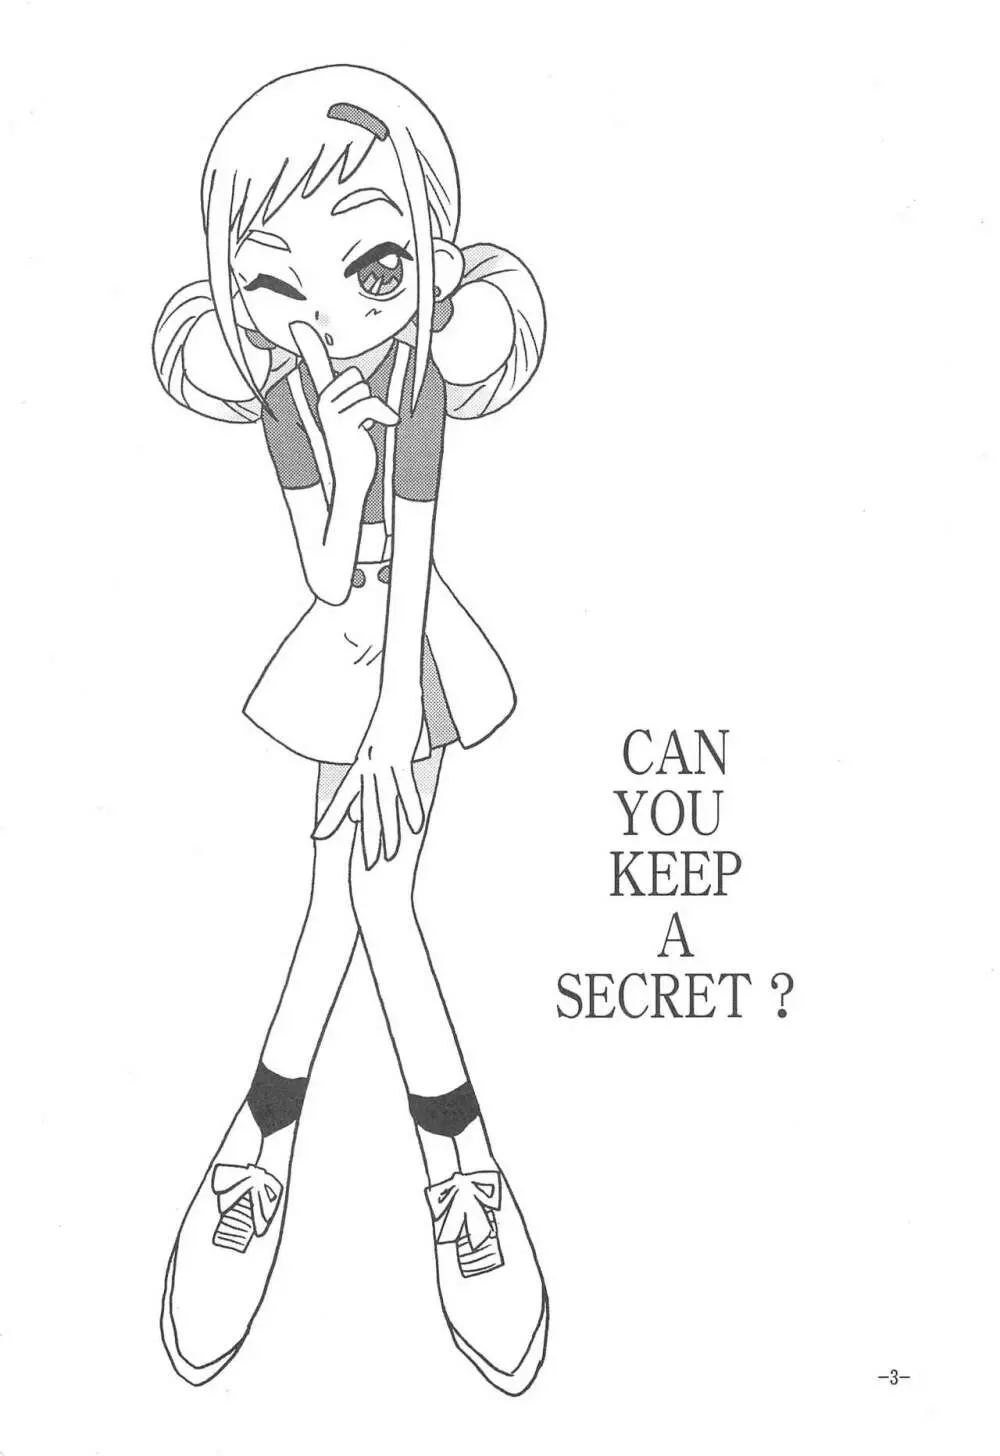 CAN YOU KEEP A SECRET? - page3